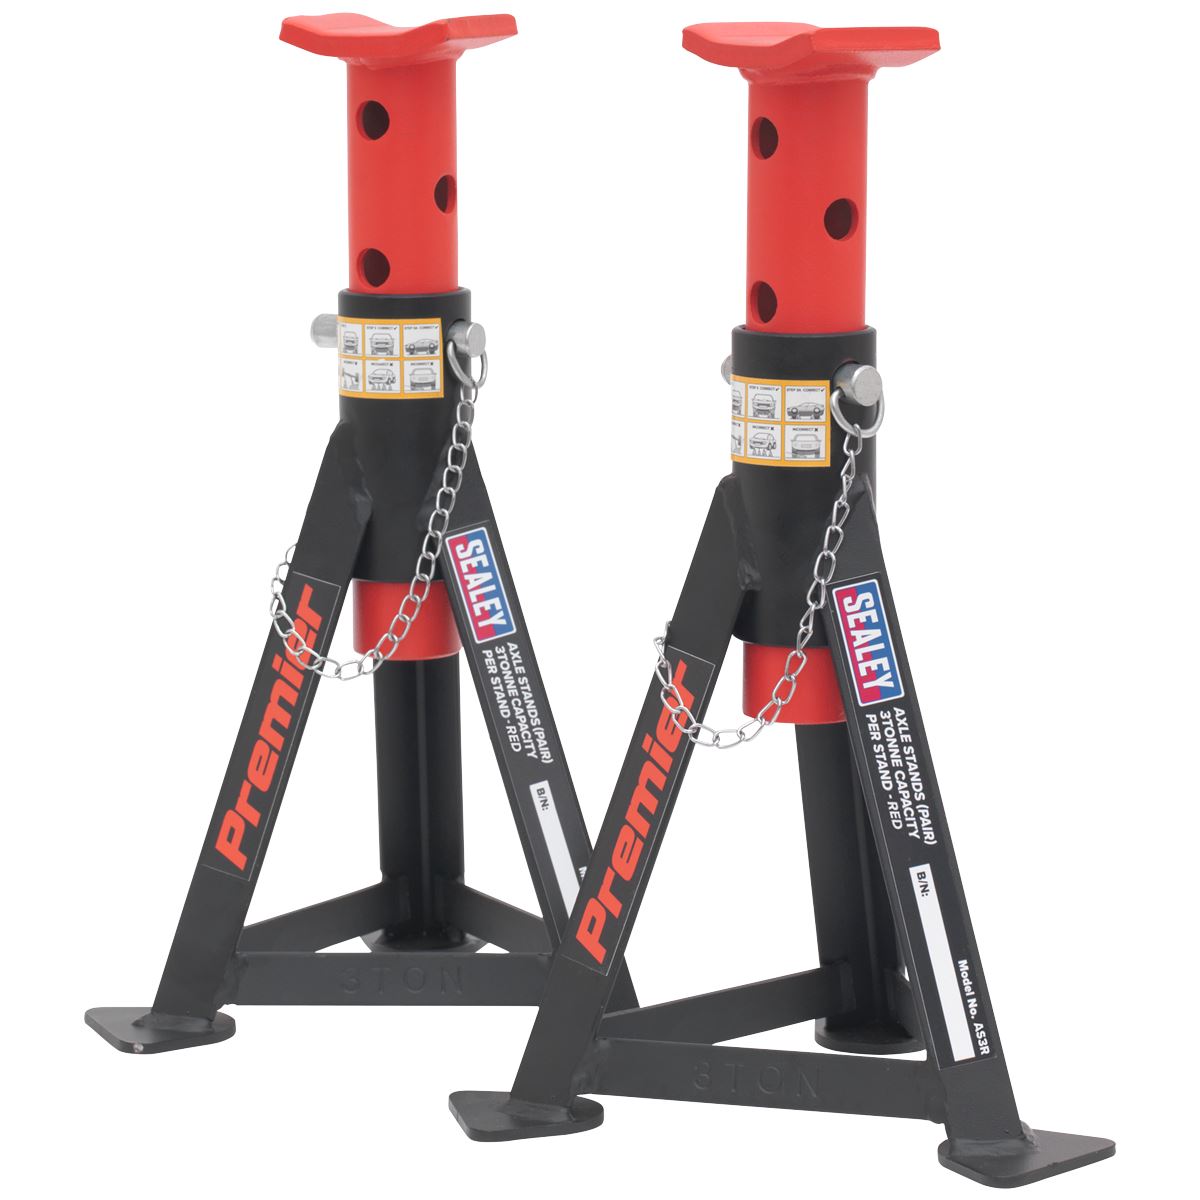 Sealey Premier Axle Stands (Pair) 3 Tonne Capacity per Stand - Red